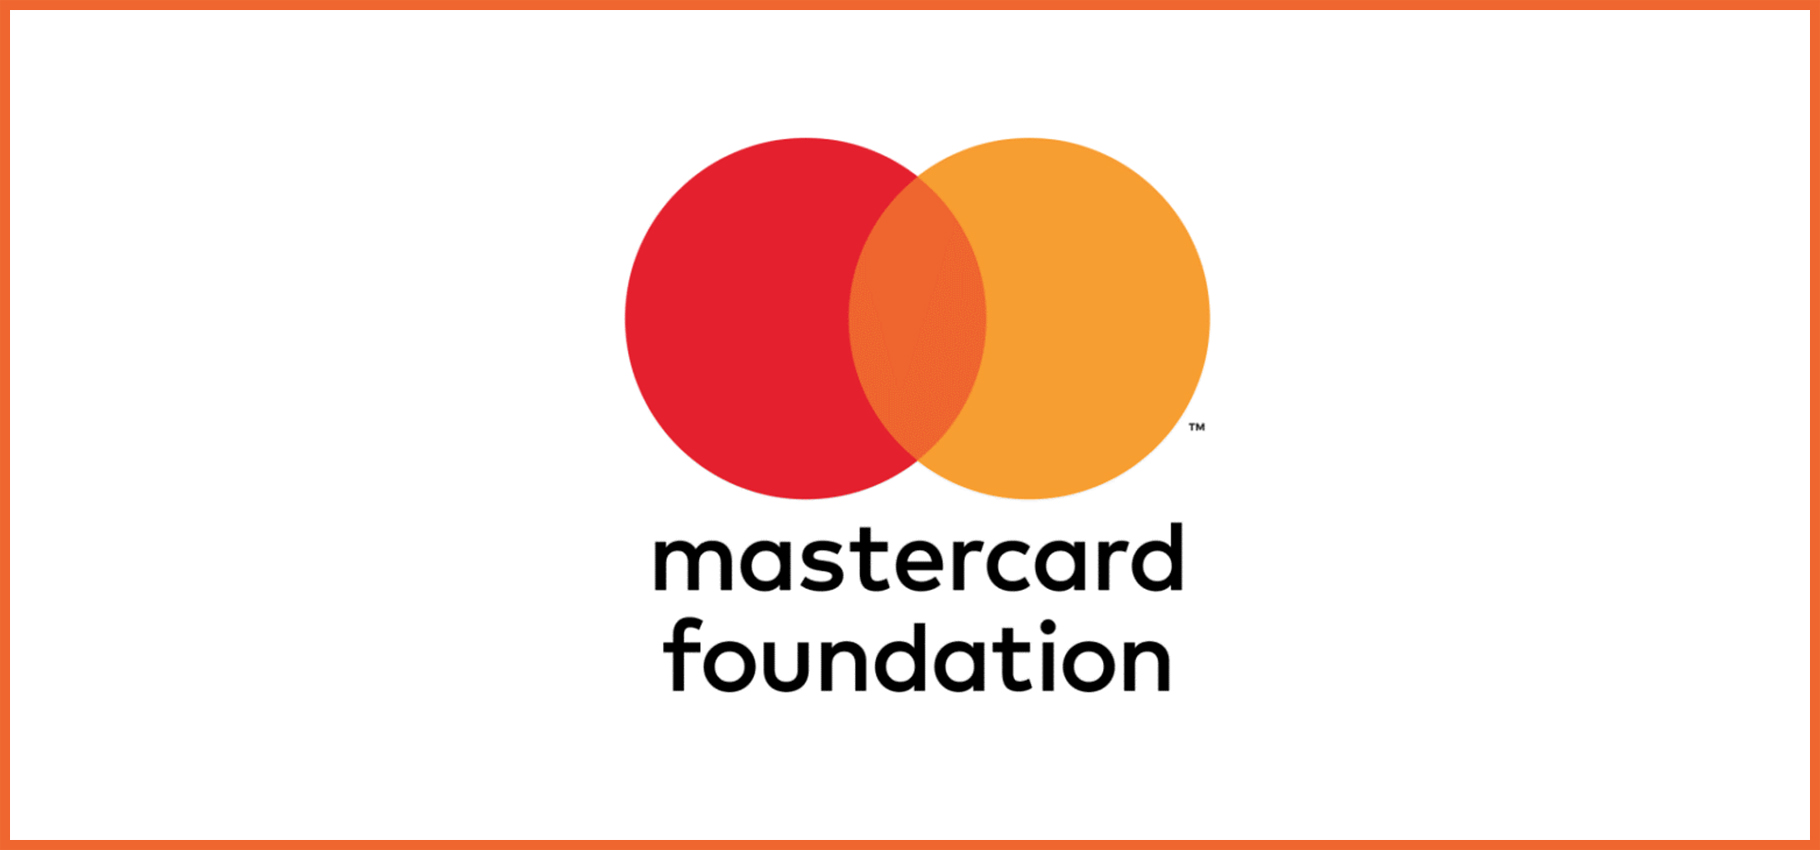 The Mastercard Foundation Africa Growth Fund has launched a $200 million funding facility for African SMEs